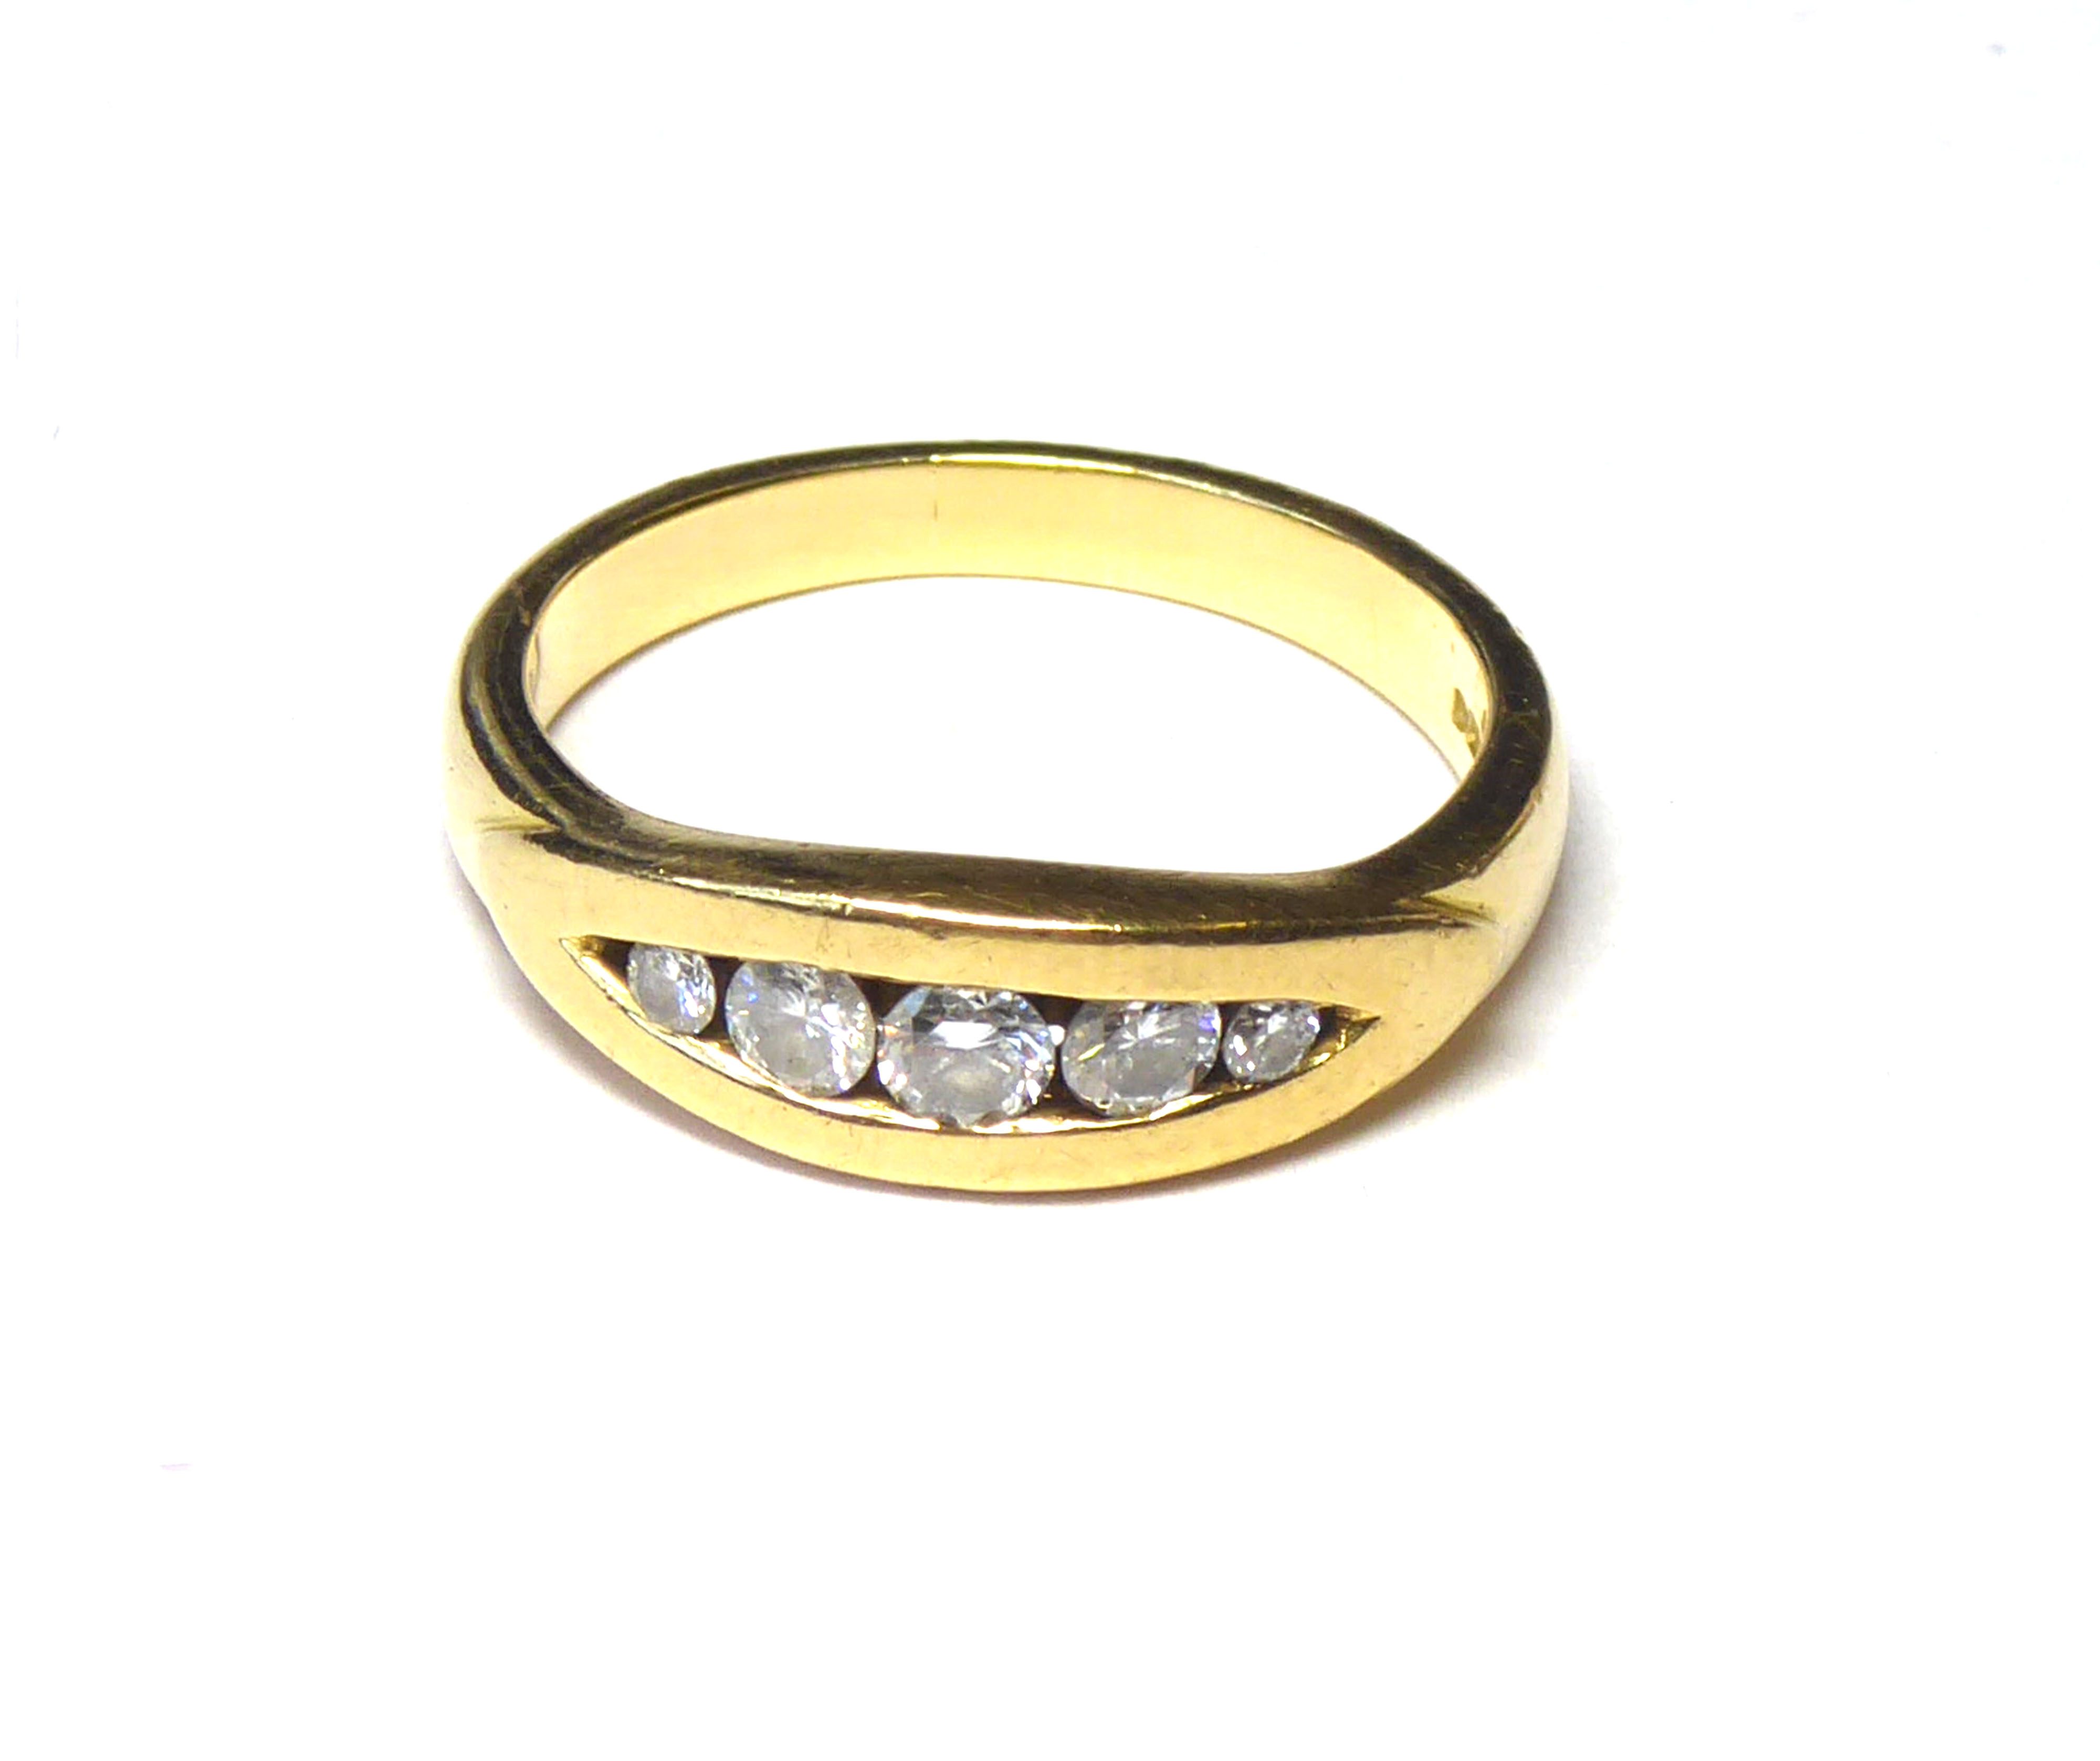 AN 18CT GOLD AND DIAMOMD FIVE STONE RING Graduating round cut stones in a rub over setting (size N). - Image 2 of 2